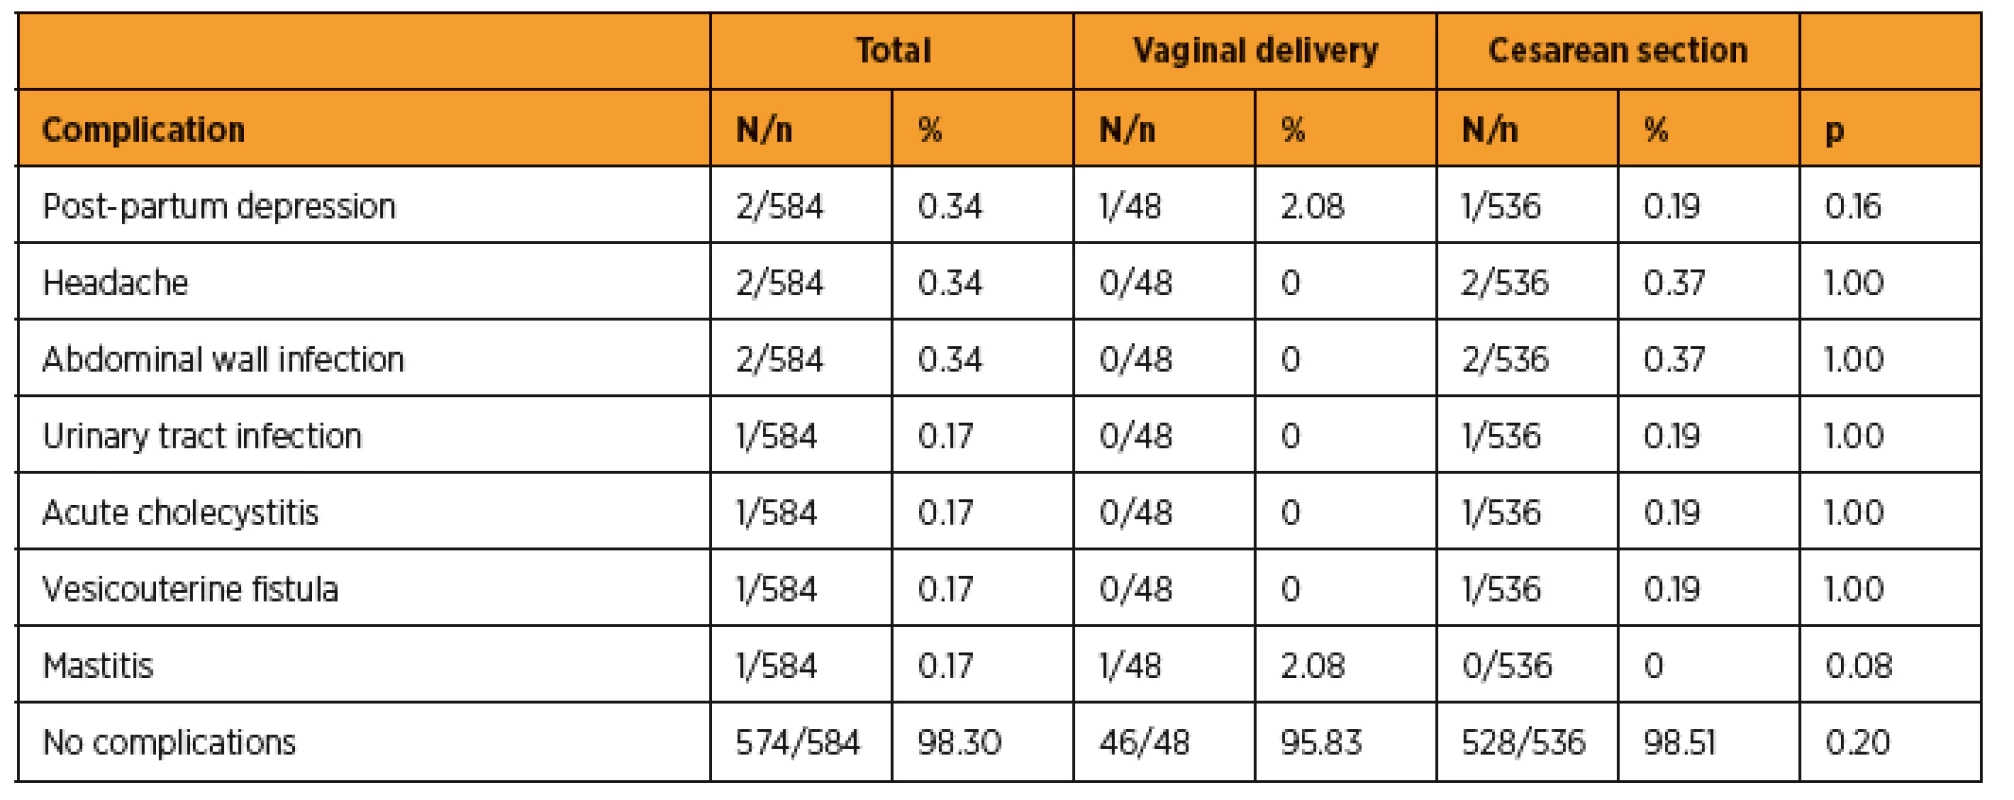 Maternal complications according to the type of delivery